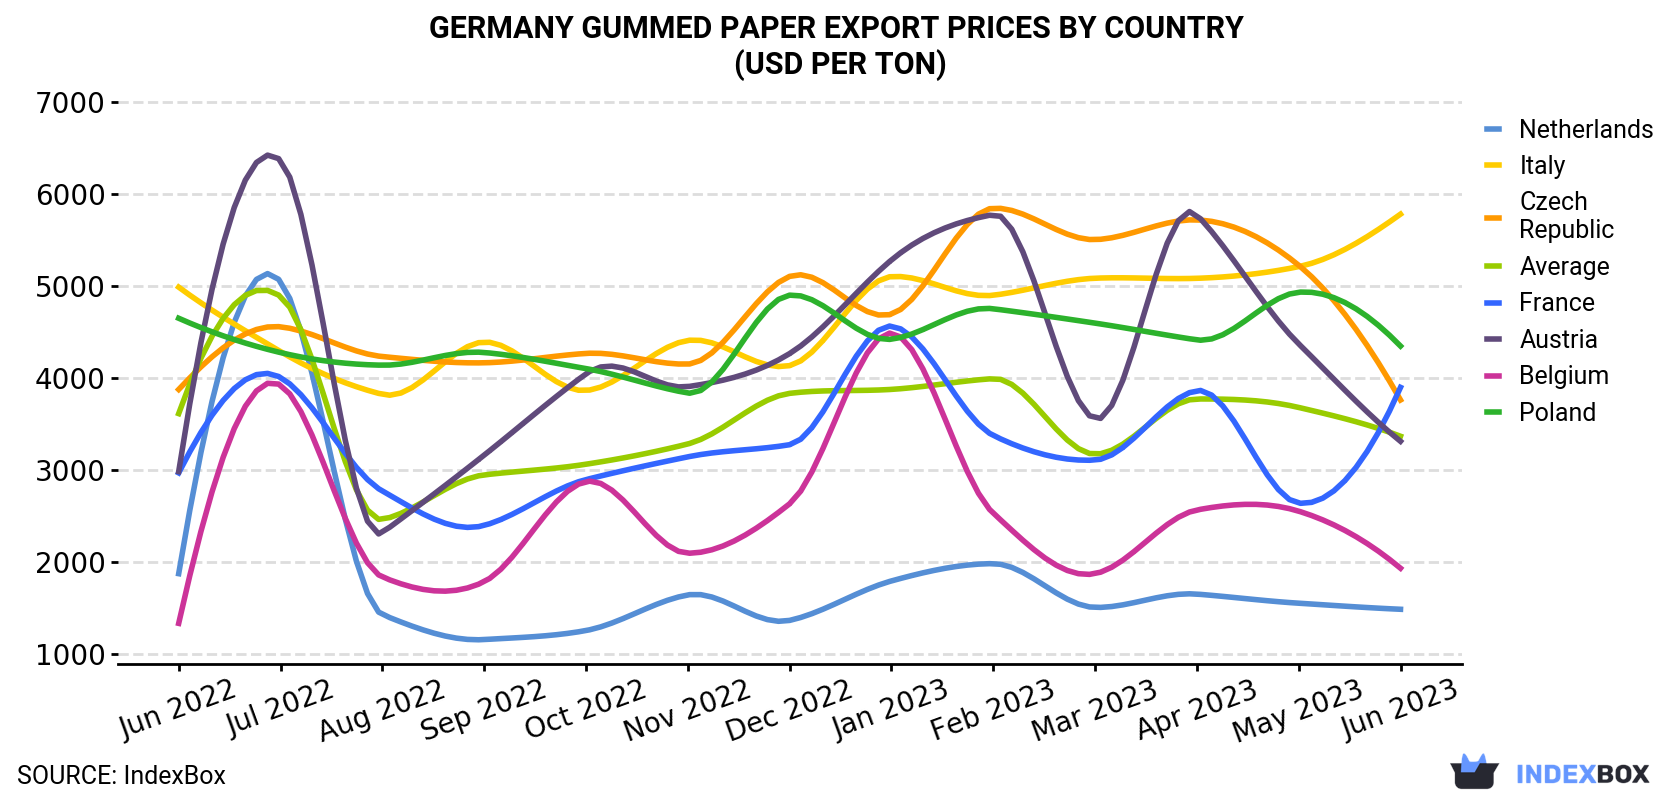 Germany Gummed Paper Export Prices By Country (USD Per Ton)